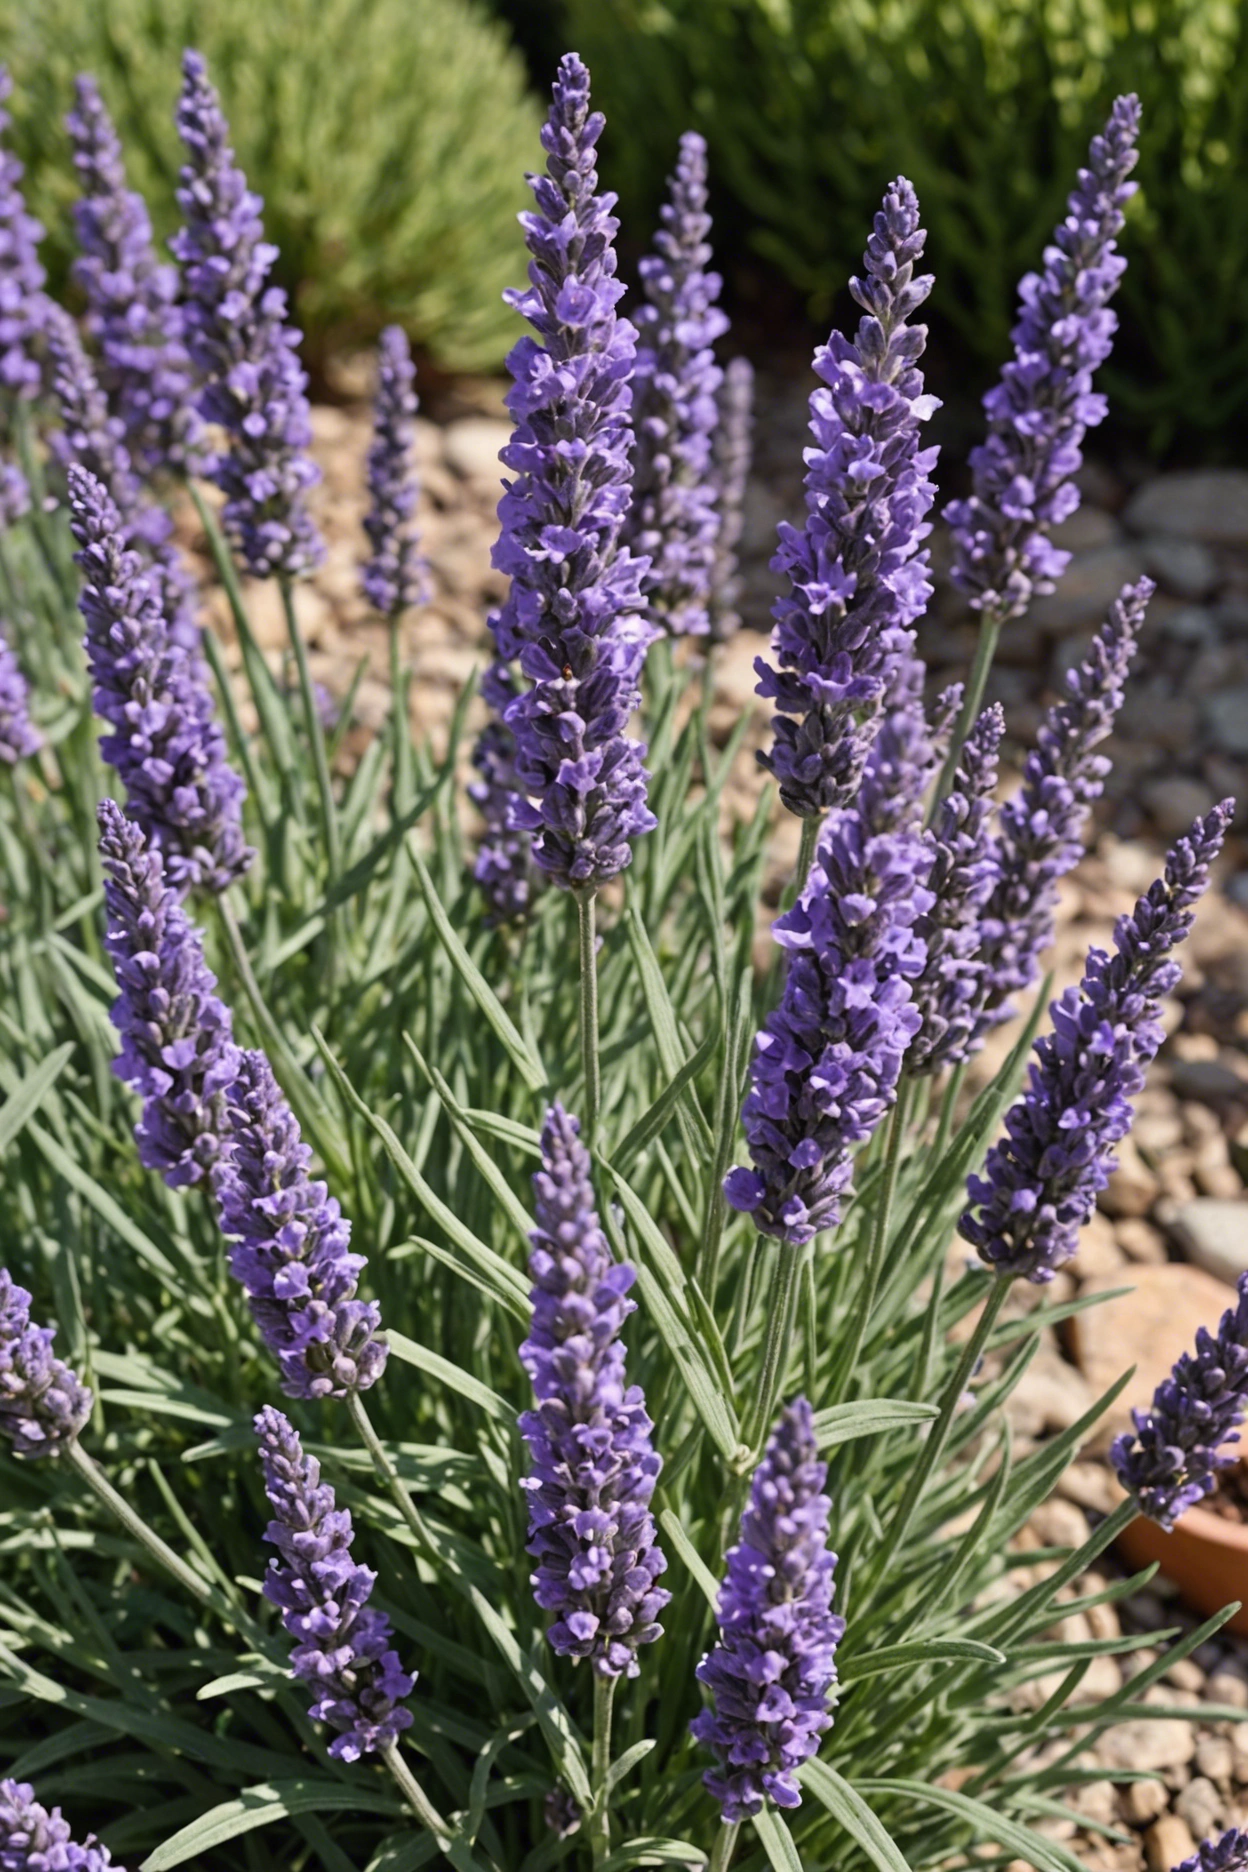 "Close-up of a mature 'Provence' lavender plant in full bloom, surrounded by garden plants at different stages of growth."